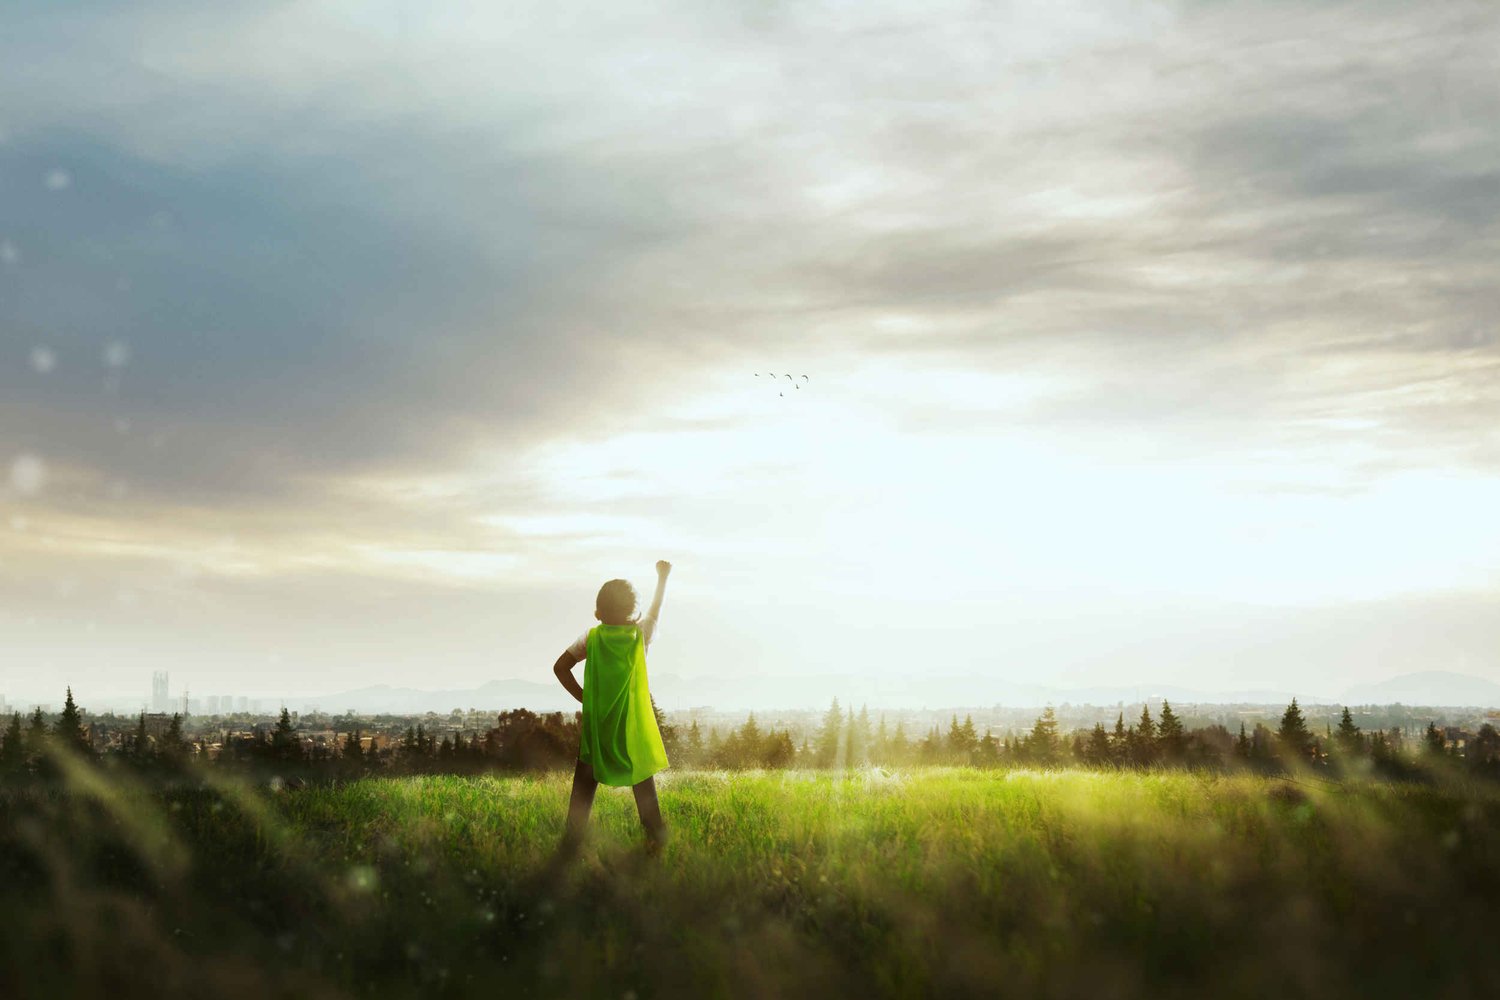 Little boy with a green superhero cape with his back to the camera in the countryside